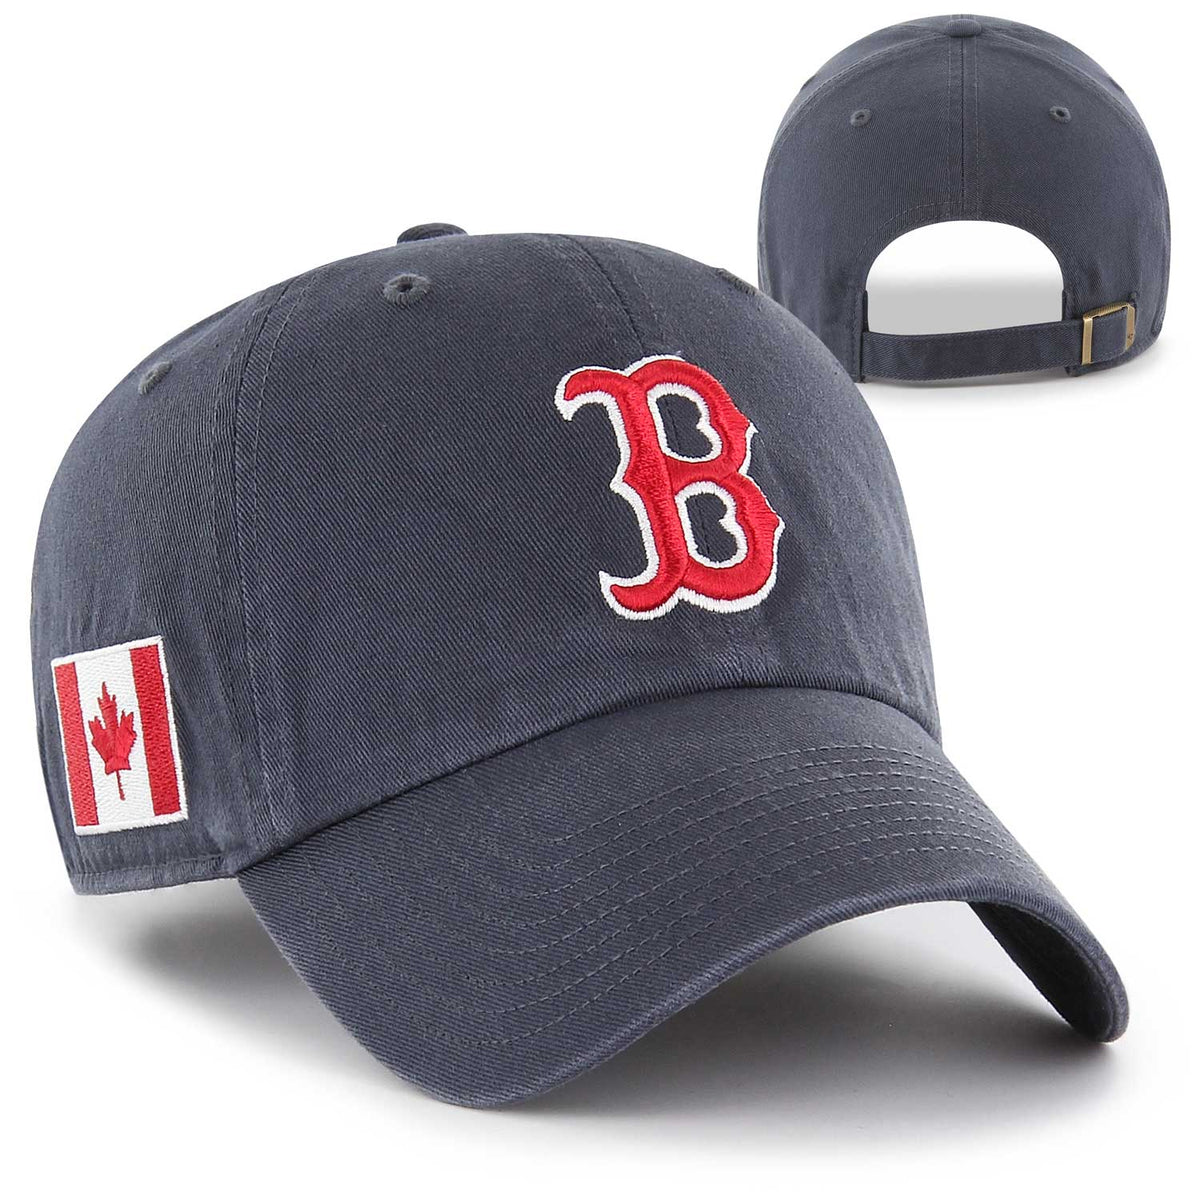 Boston Red Sox '47 Youth Vintage Team Logo Clean Up Adjustable Hat - Navy